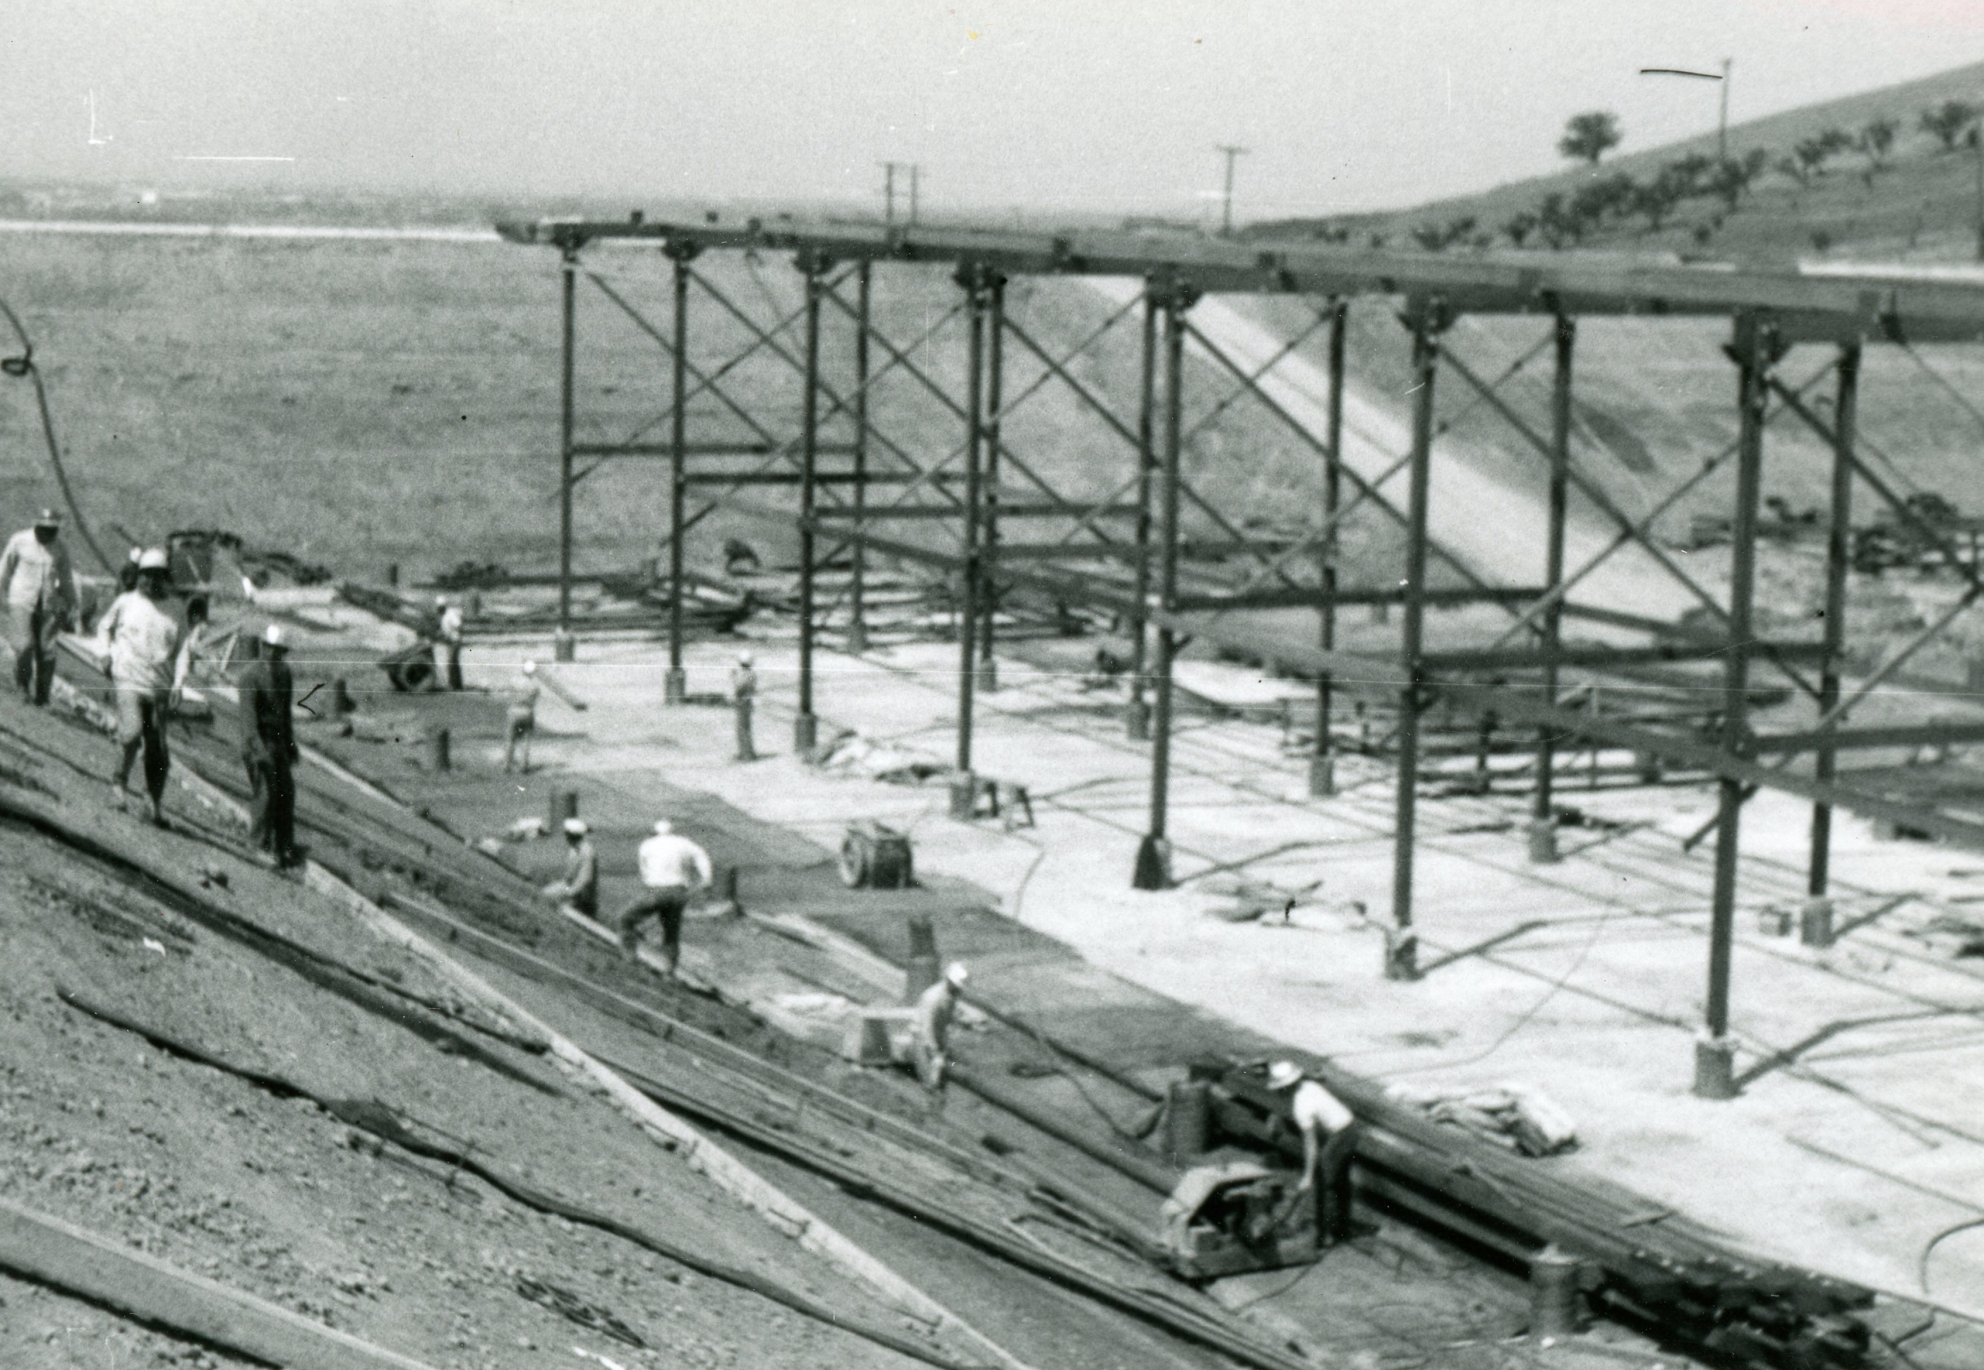 Columbine Historical Image 5 - black and white photo of workers constructing